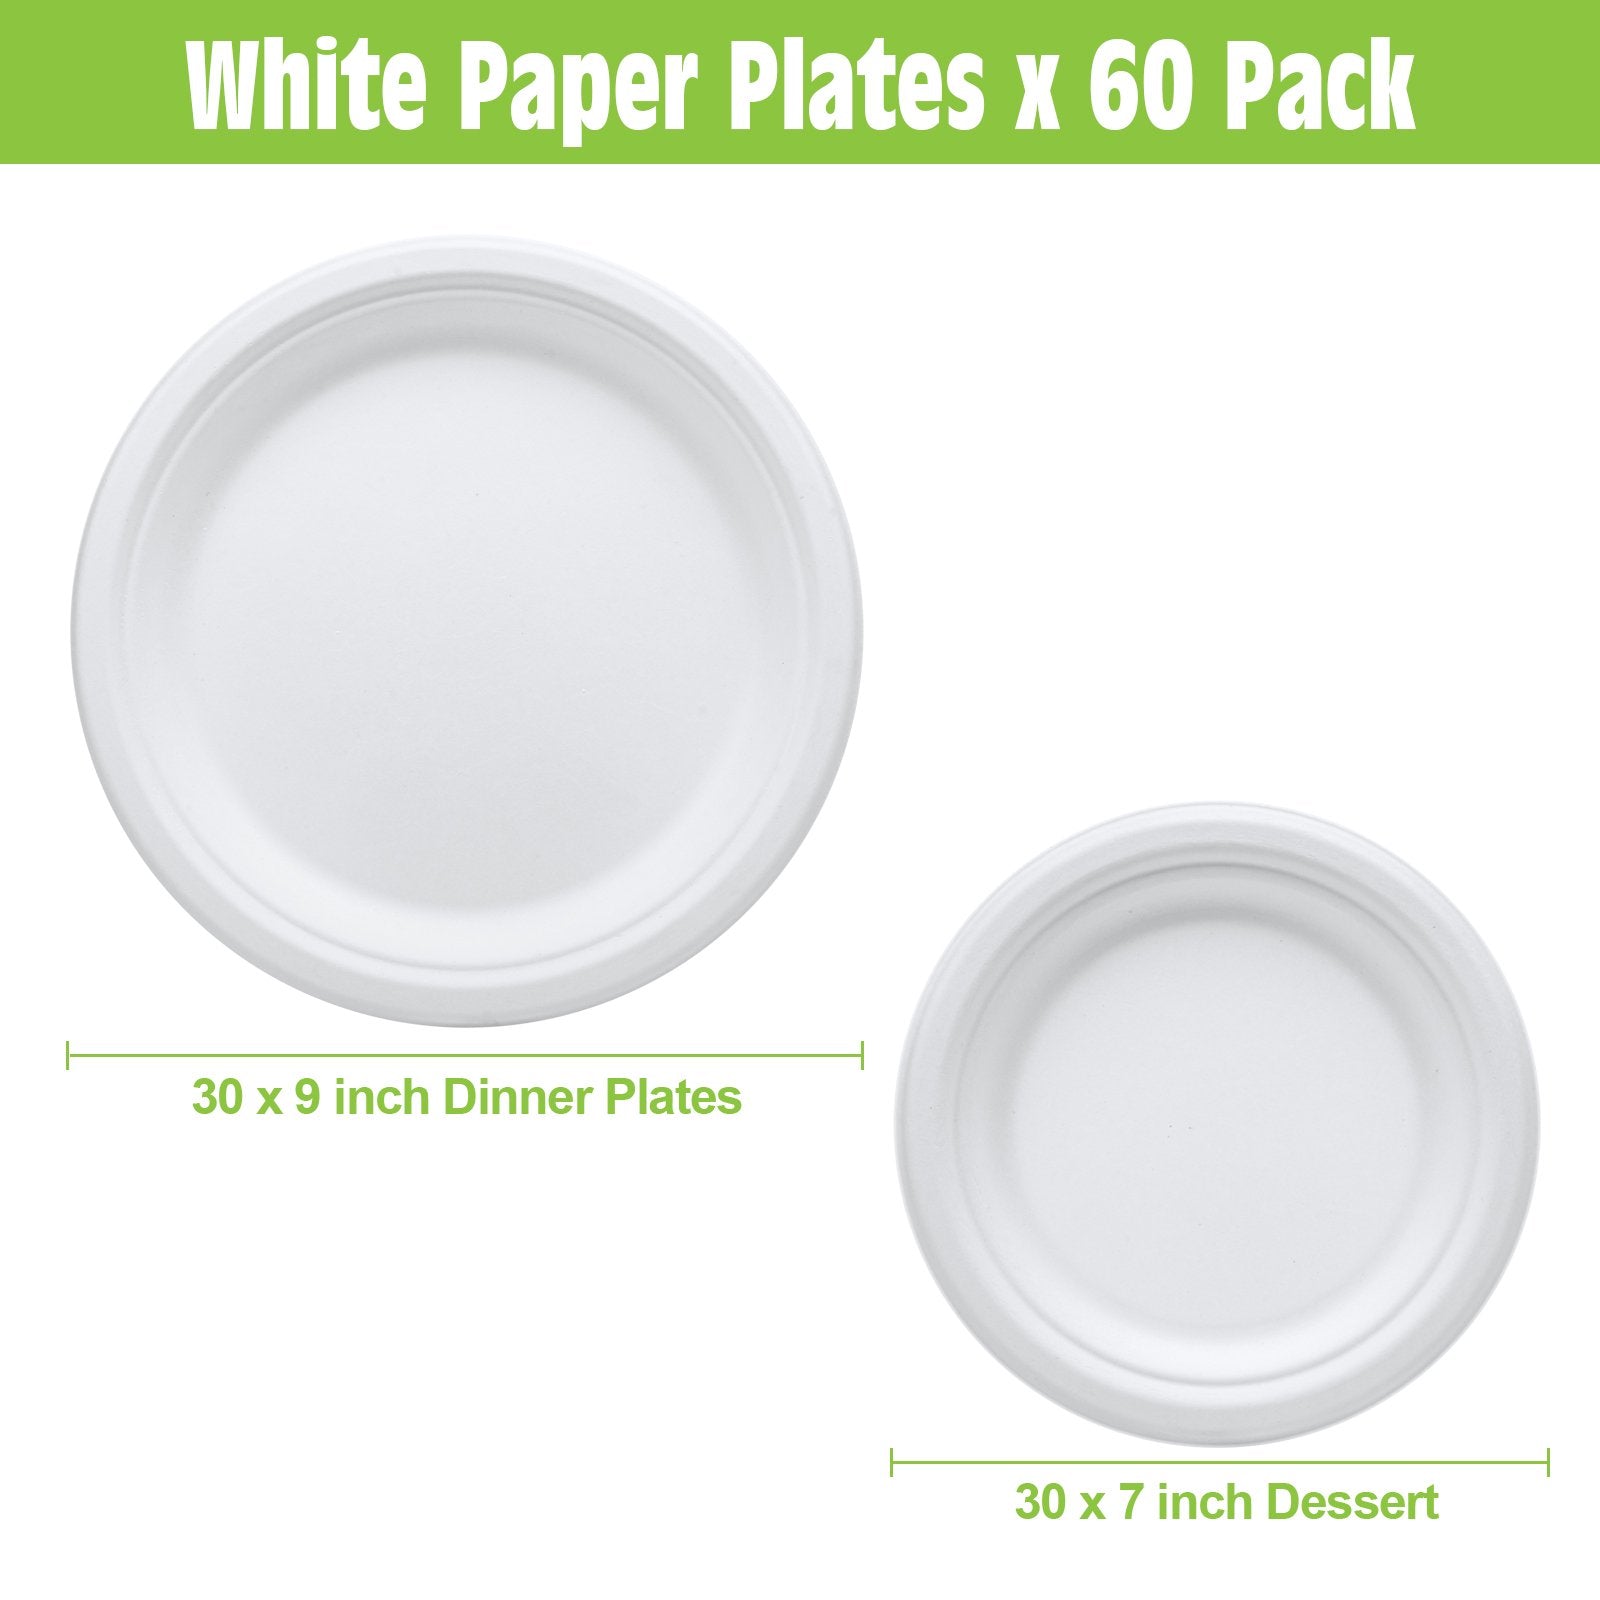 100% Compostable 9 Inch Paper Plates [150-Pack] Heavy-Duty Eco-Friendly  Disposable White Plate, Eco-Friendly Made of Sugarcane Fibers 9  Biodegradable